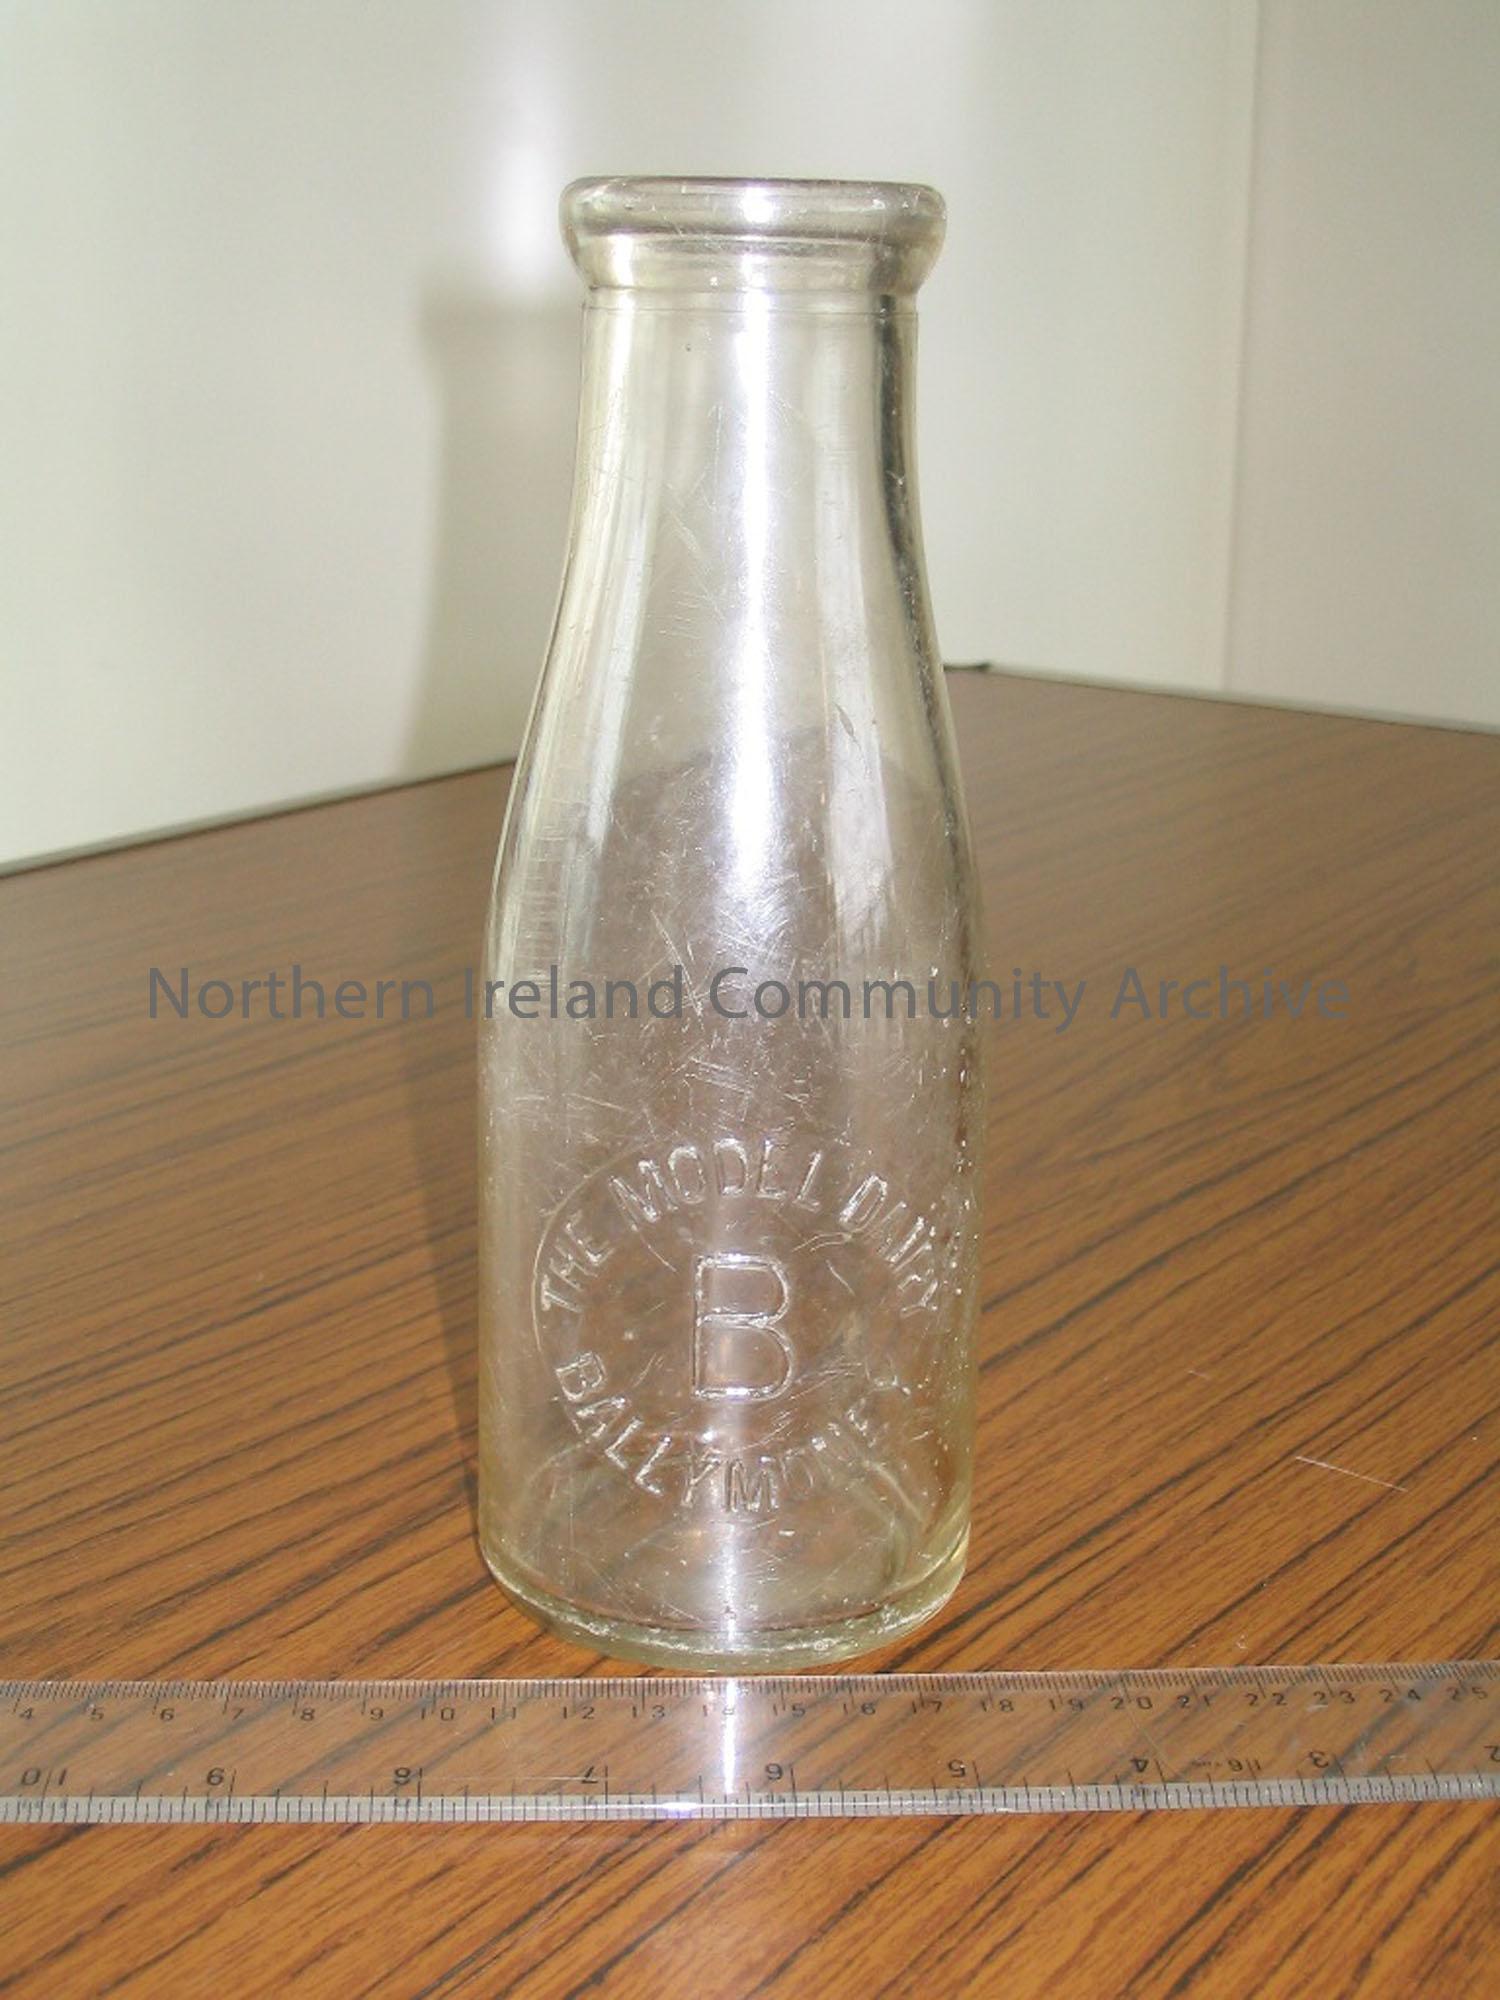 Milk bottle from the Model Dairy, which was formerly owned by the McMullan family of Currysiskin House.